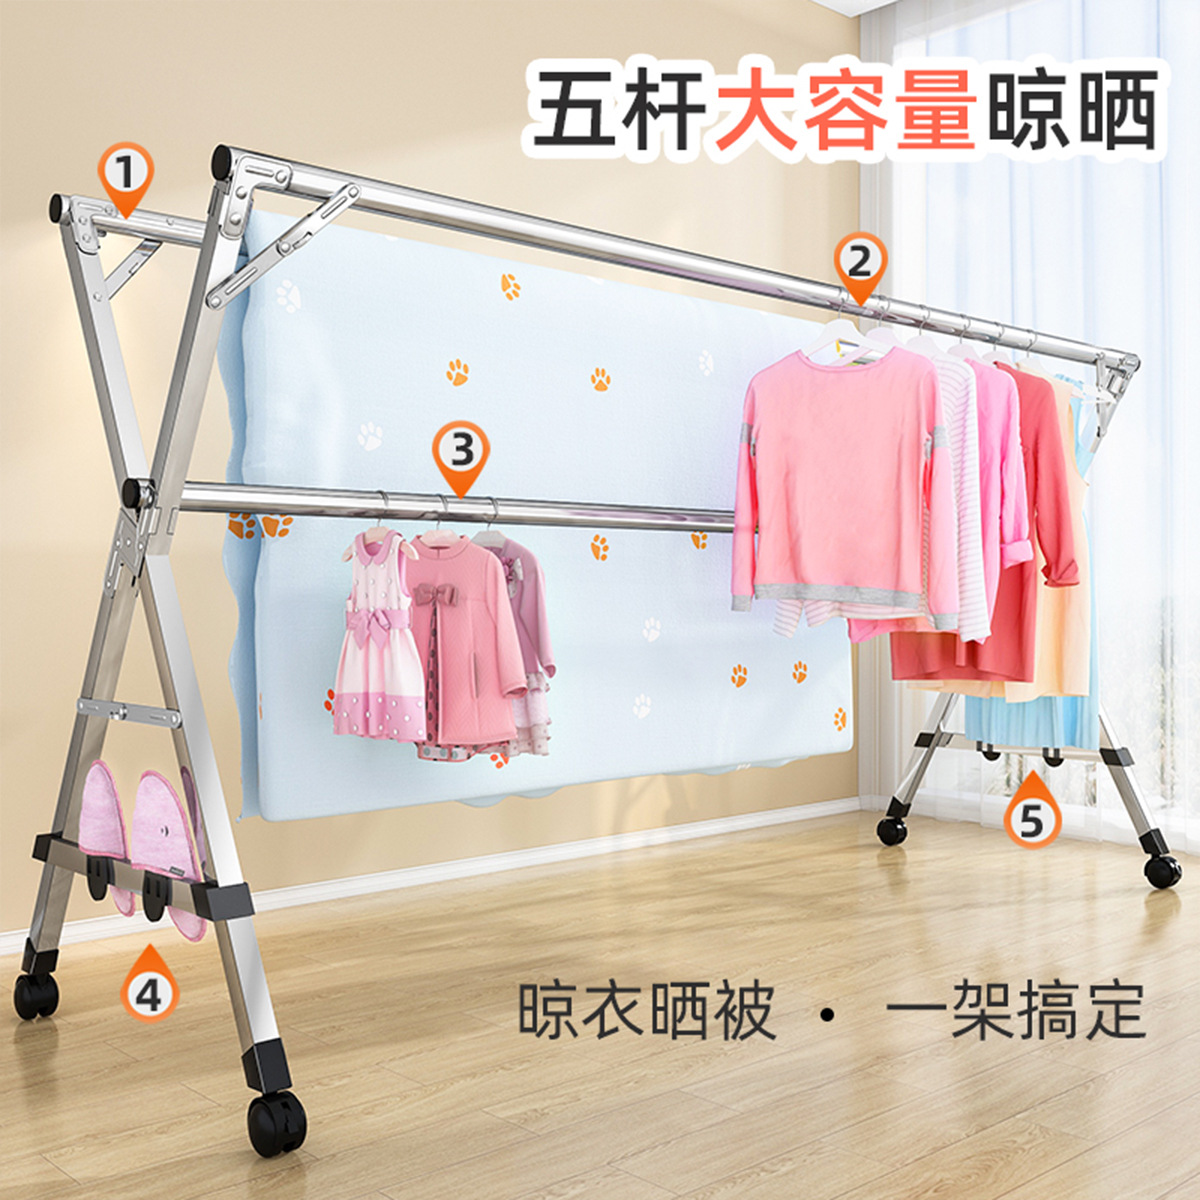 Stainless Steel Laundry Rack Floor Folding Indoor and Outdoor Drying Rack Double Pole Balcony X-Type Retractable Bold Clothing Rod